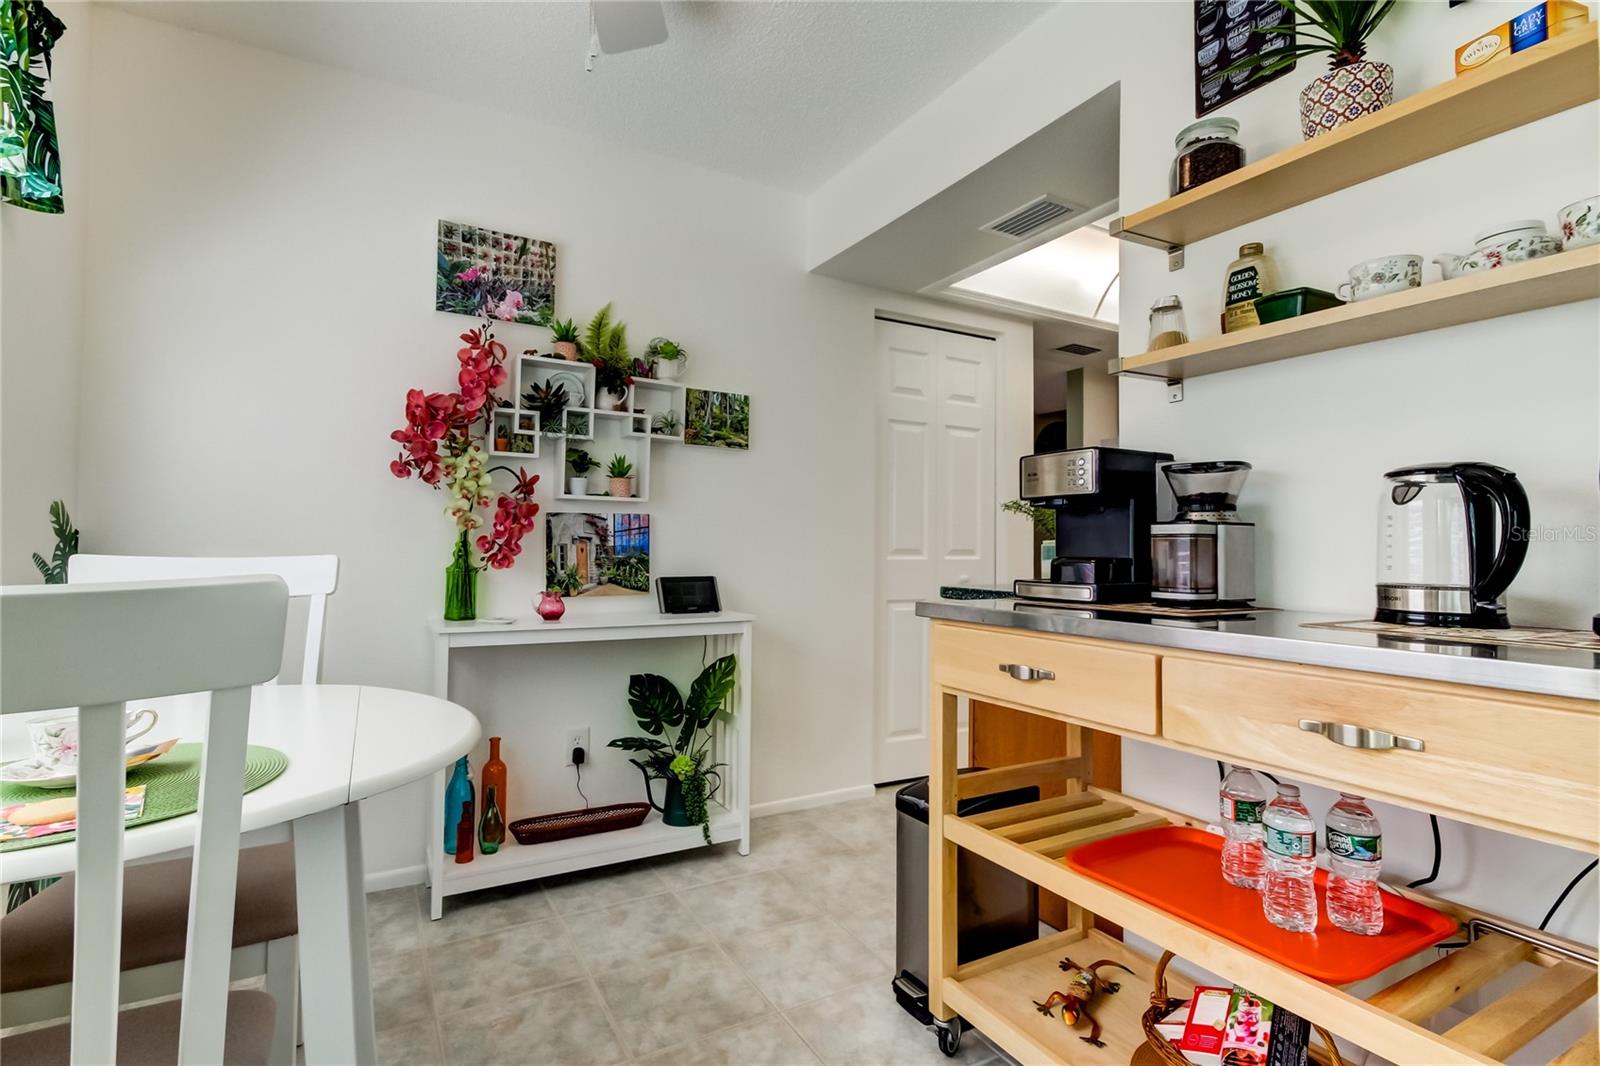 Beautiful Built In Shelving Compliments the Kitchen Cabinetry.. Creating a Convenient Coffee or Tea Bar too!